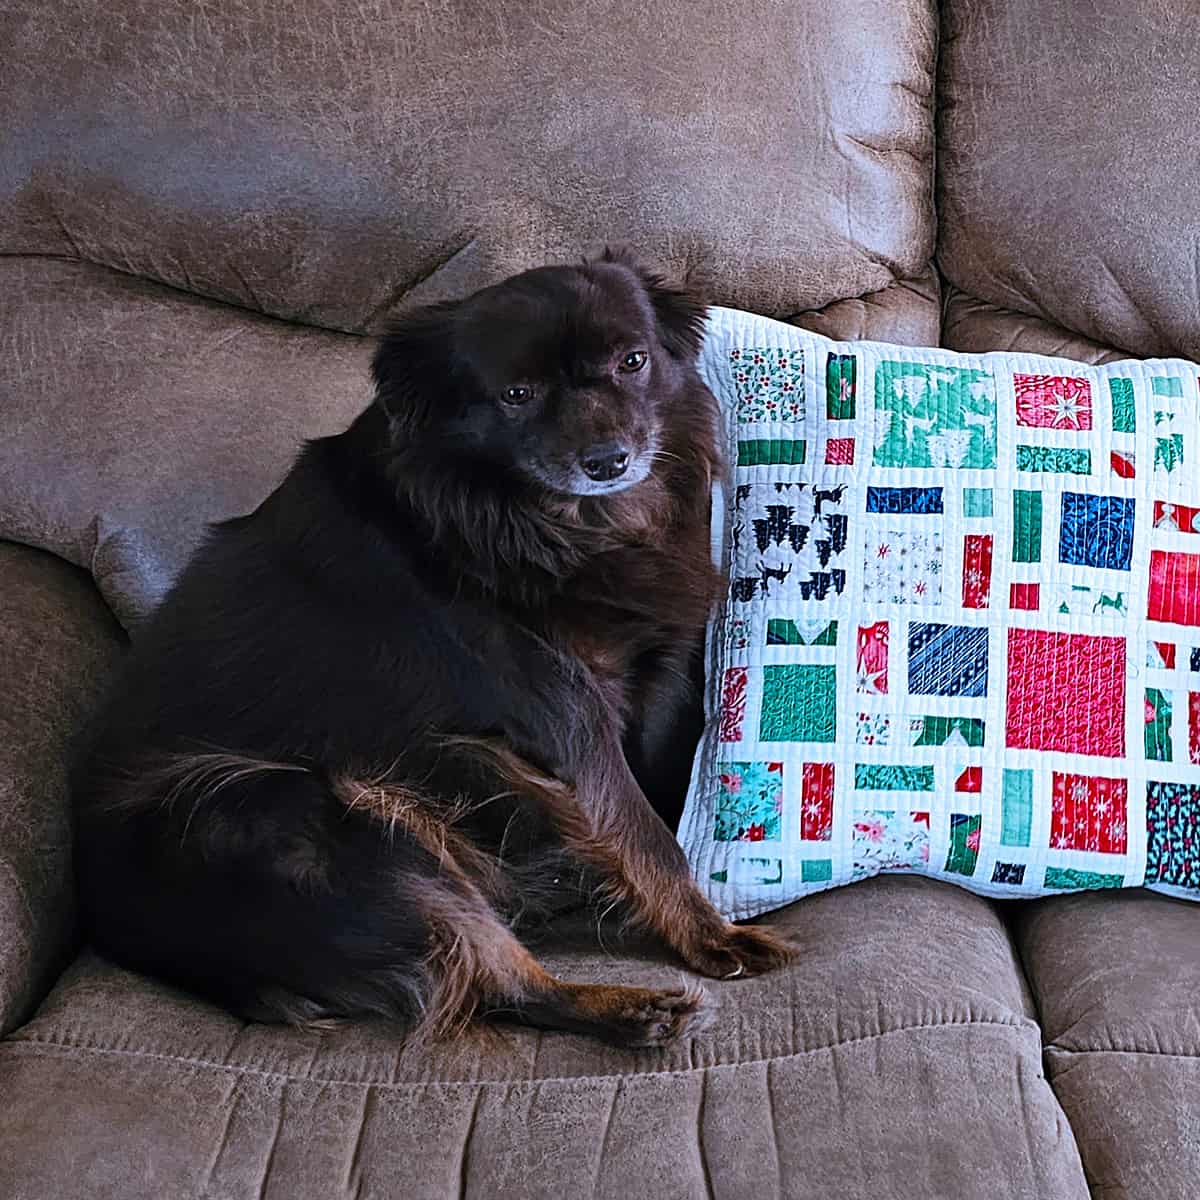 Rusty with the pillows on the couch